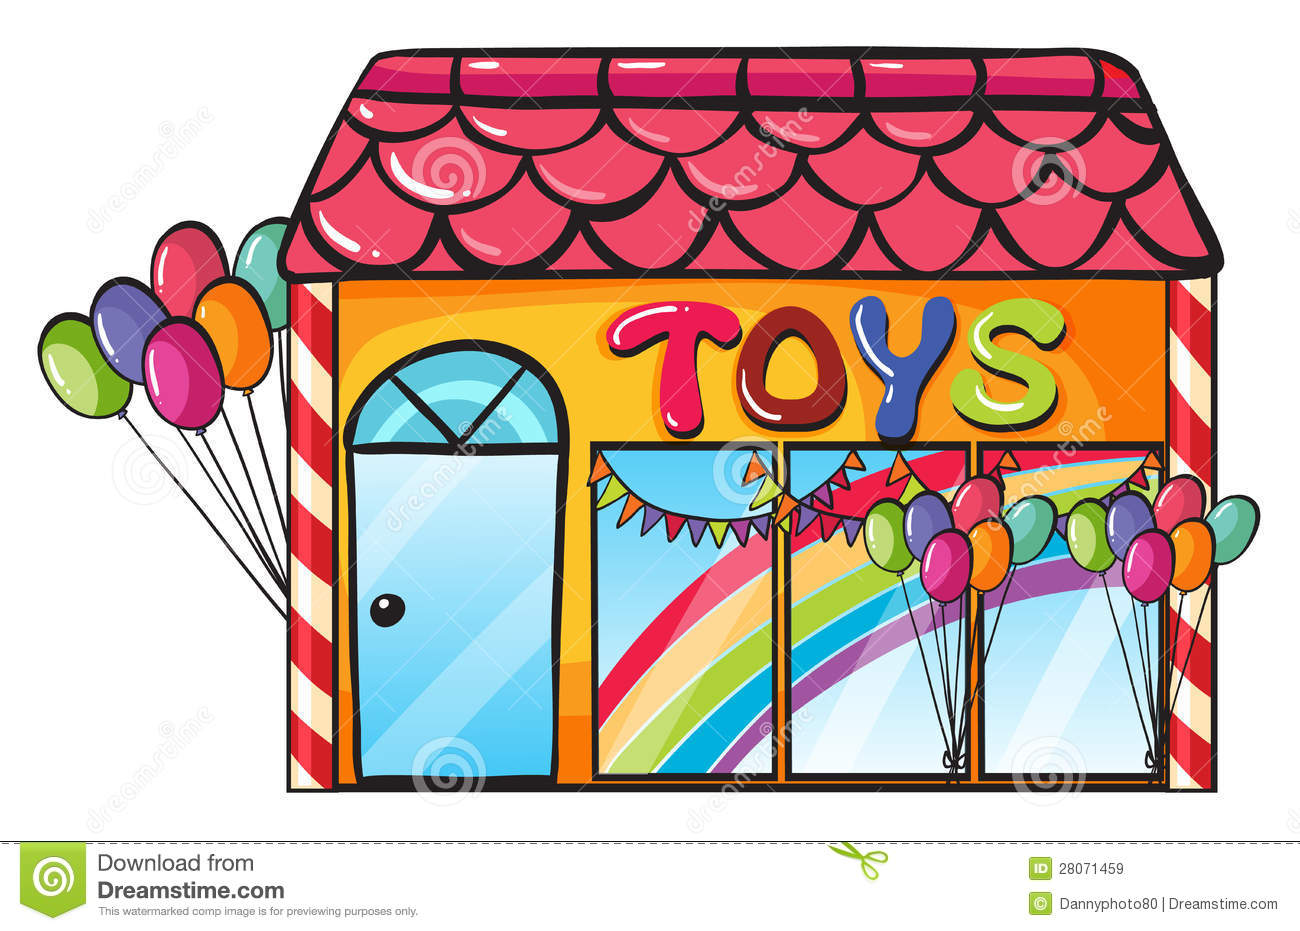 Toy Shop Royalty Free Stock Images   Image  28071459